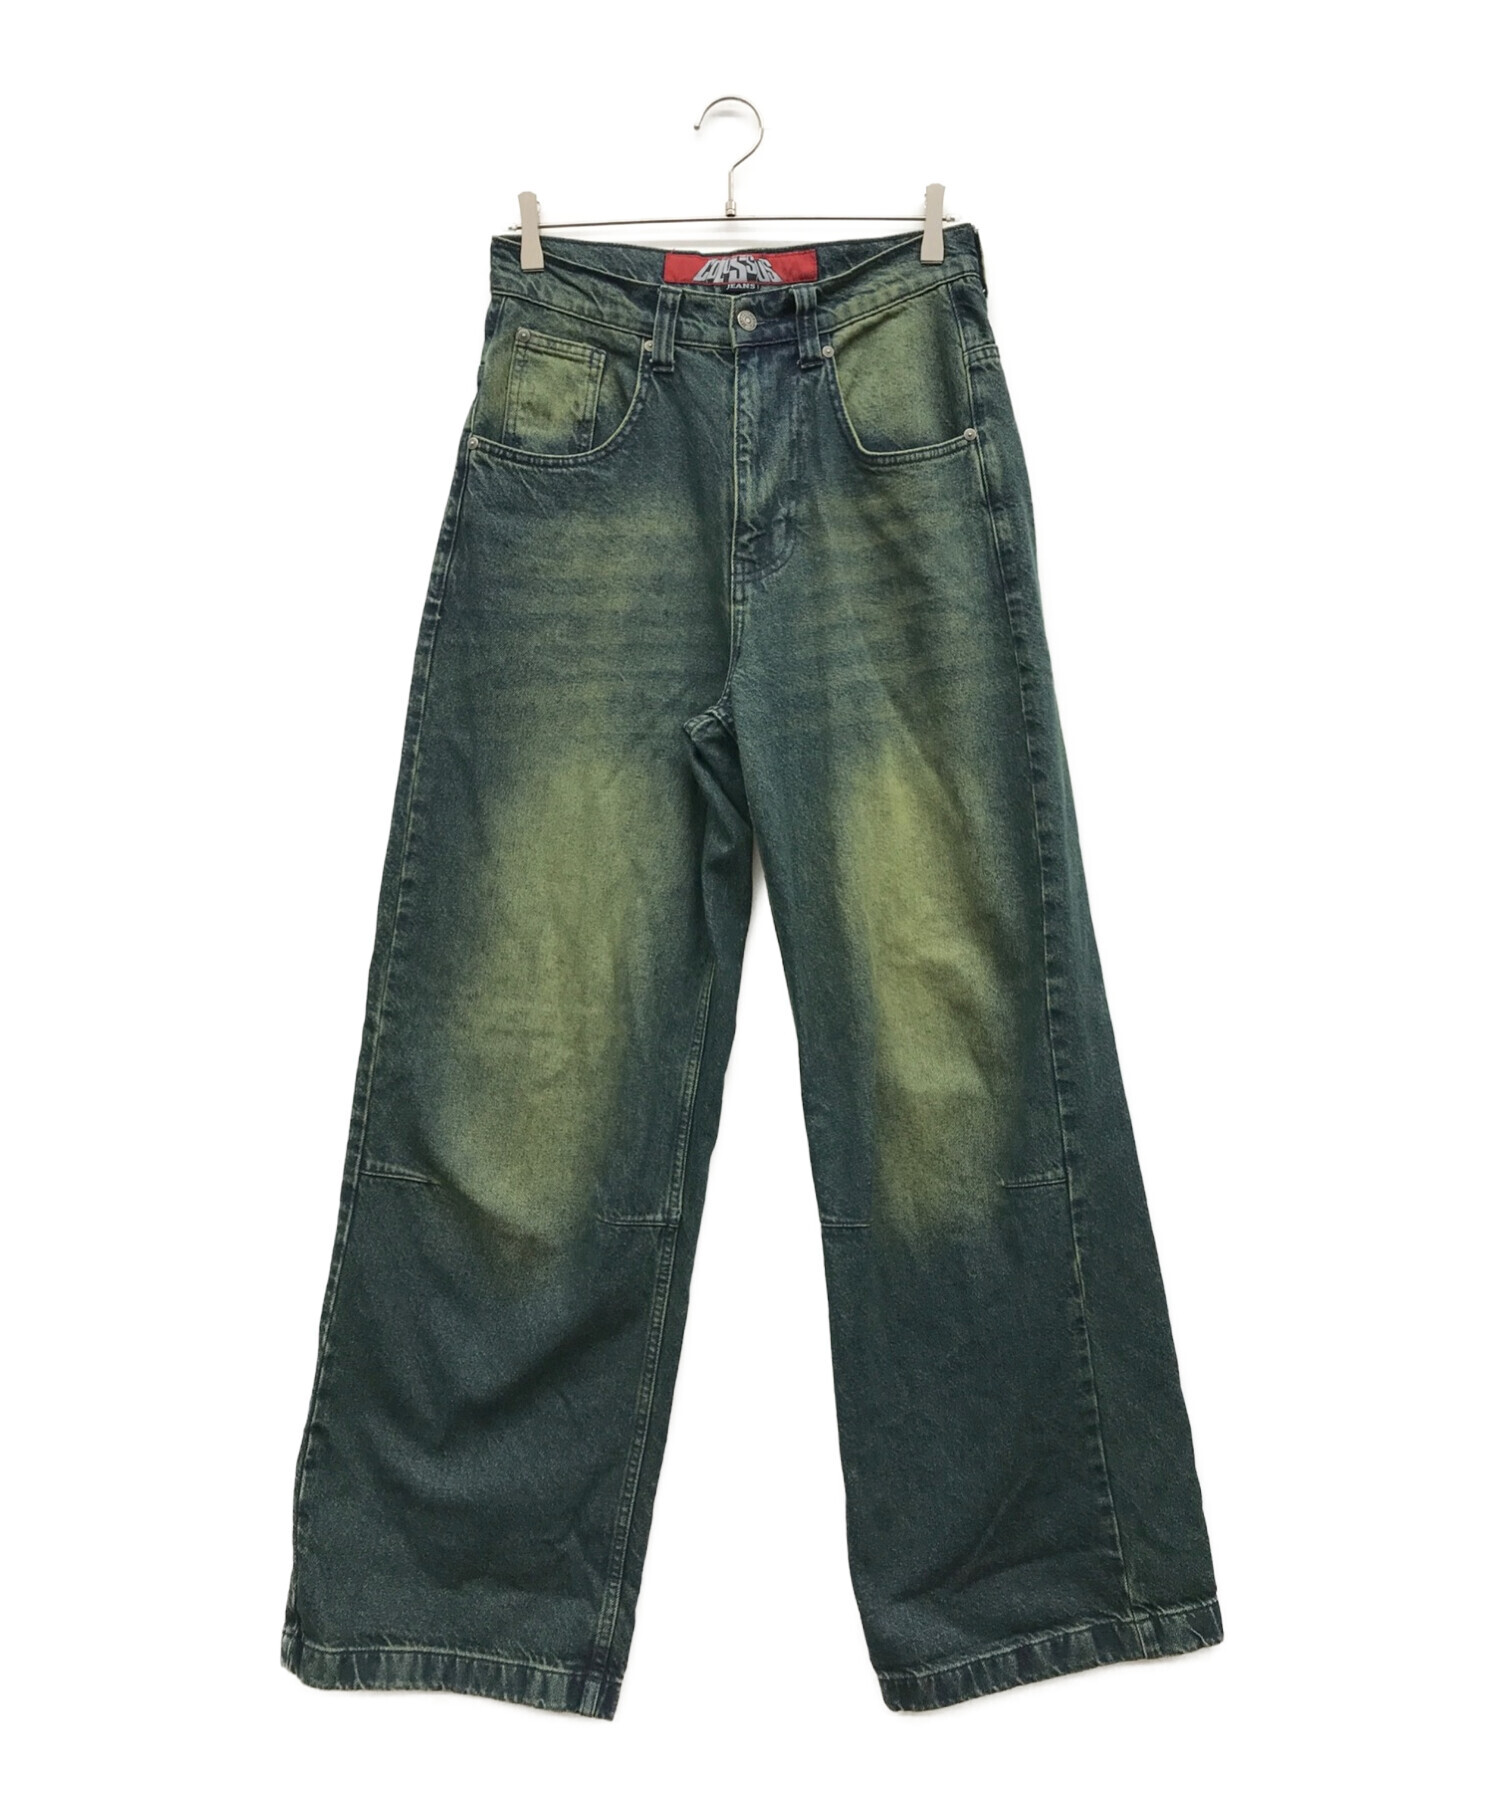 JADED LONDON Colossus Fit Jeans デニム W3024時間以内に発送いたします